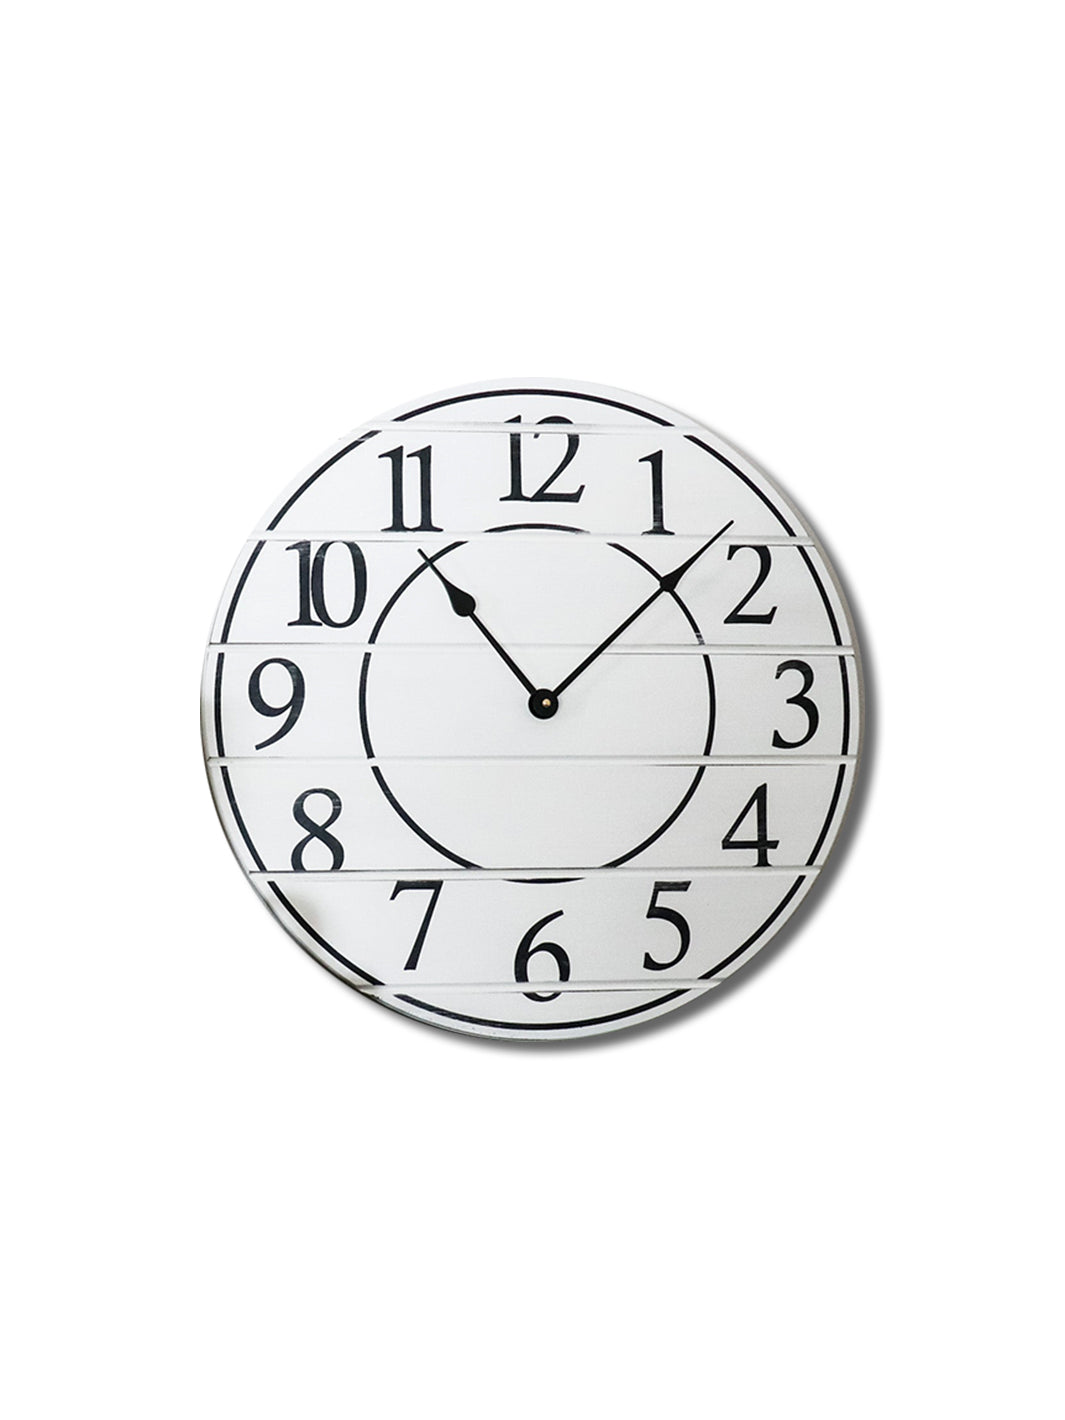 White Lightly Distressed Large Wall Clock with Black Numbers (in stock) Earthly Comfort Clocks ECH1200